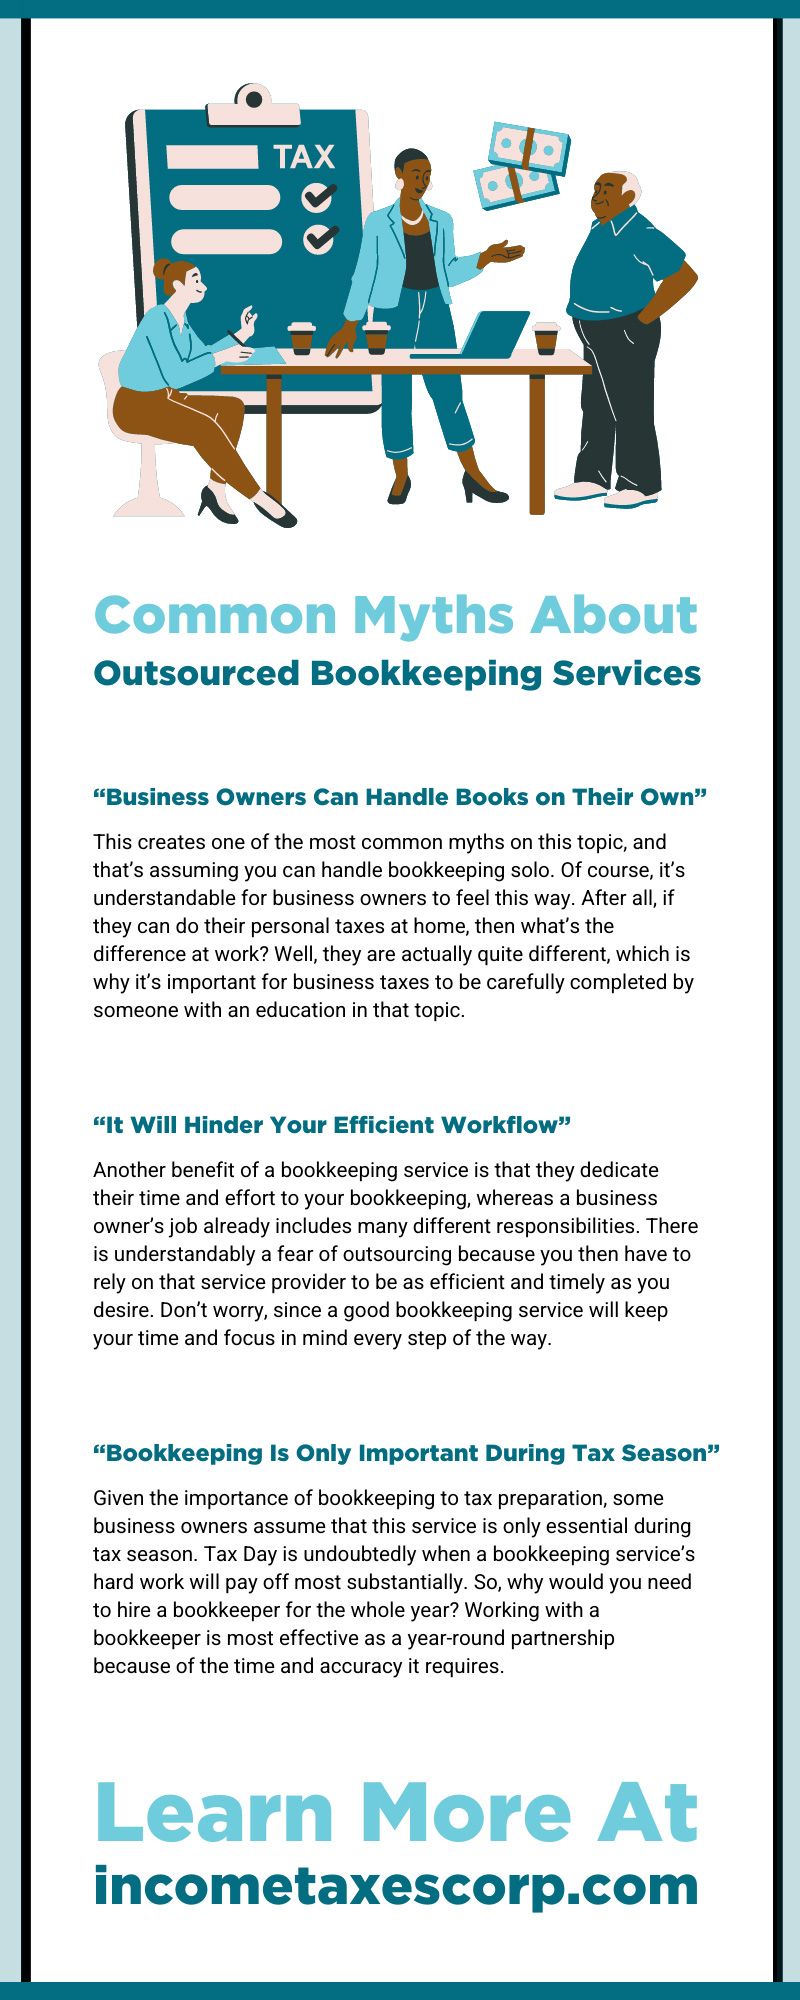 Common Myths About Outsourced Bookkeeping Services